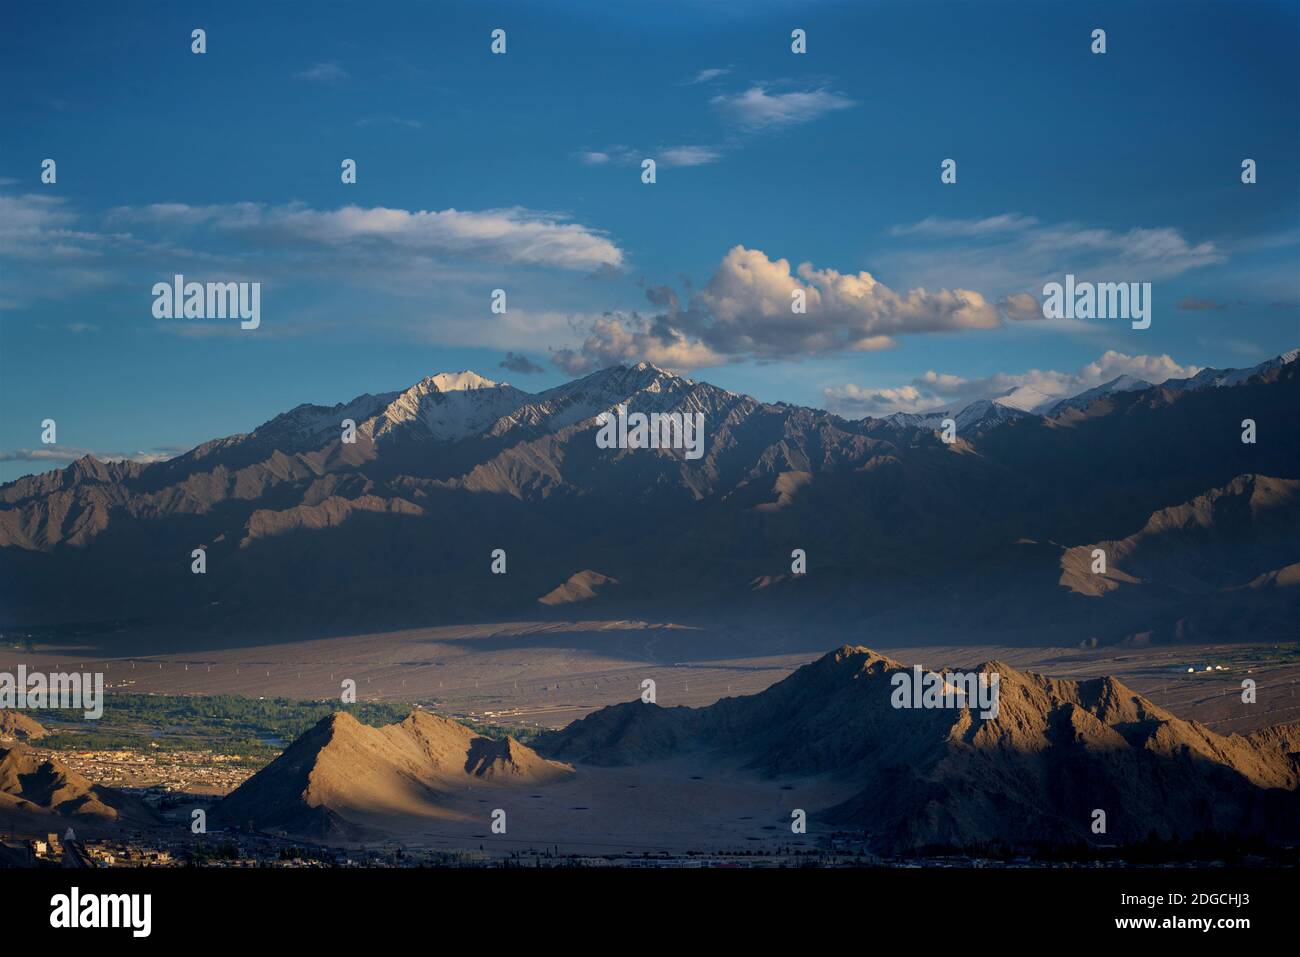 View of the landscape surrounding the Shanti Stupa at Chanspa, Leh district, Ladakh, Jammu and Kashmir, India in July Stock Photo